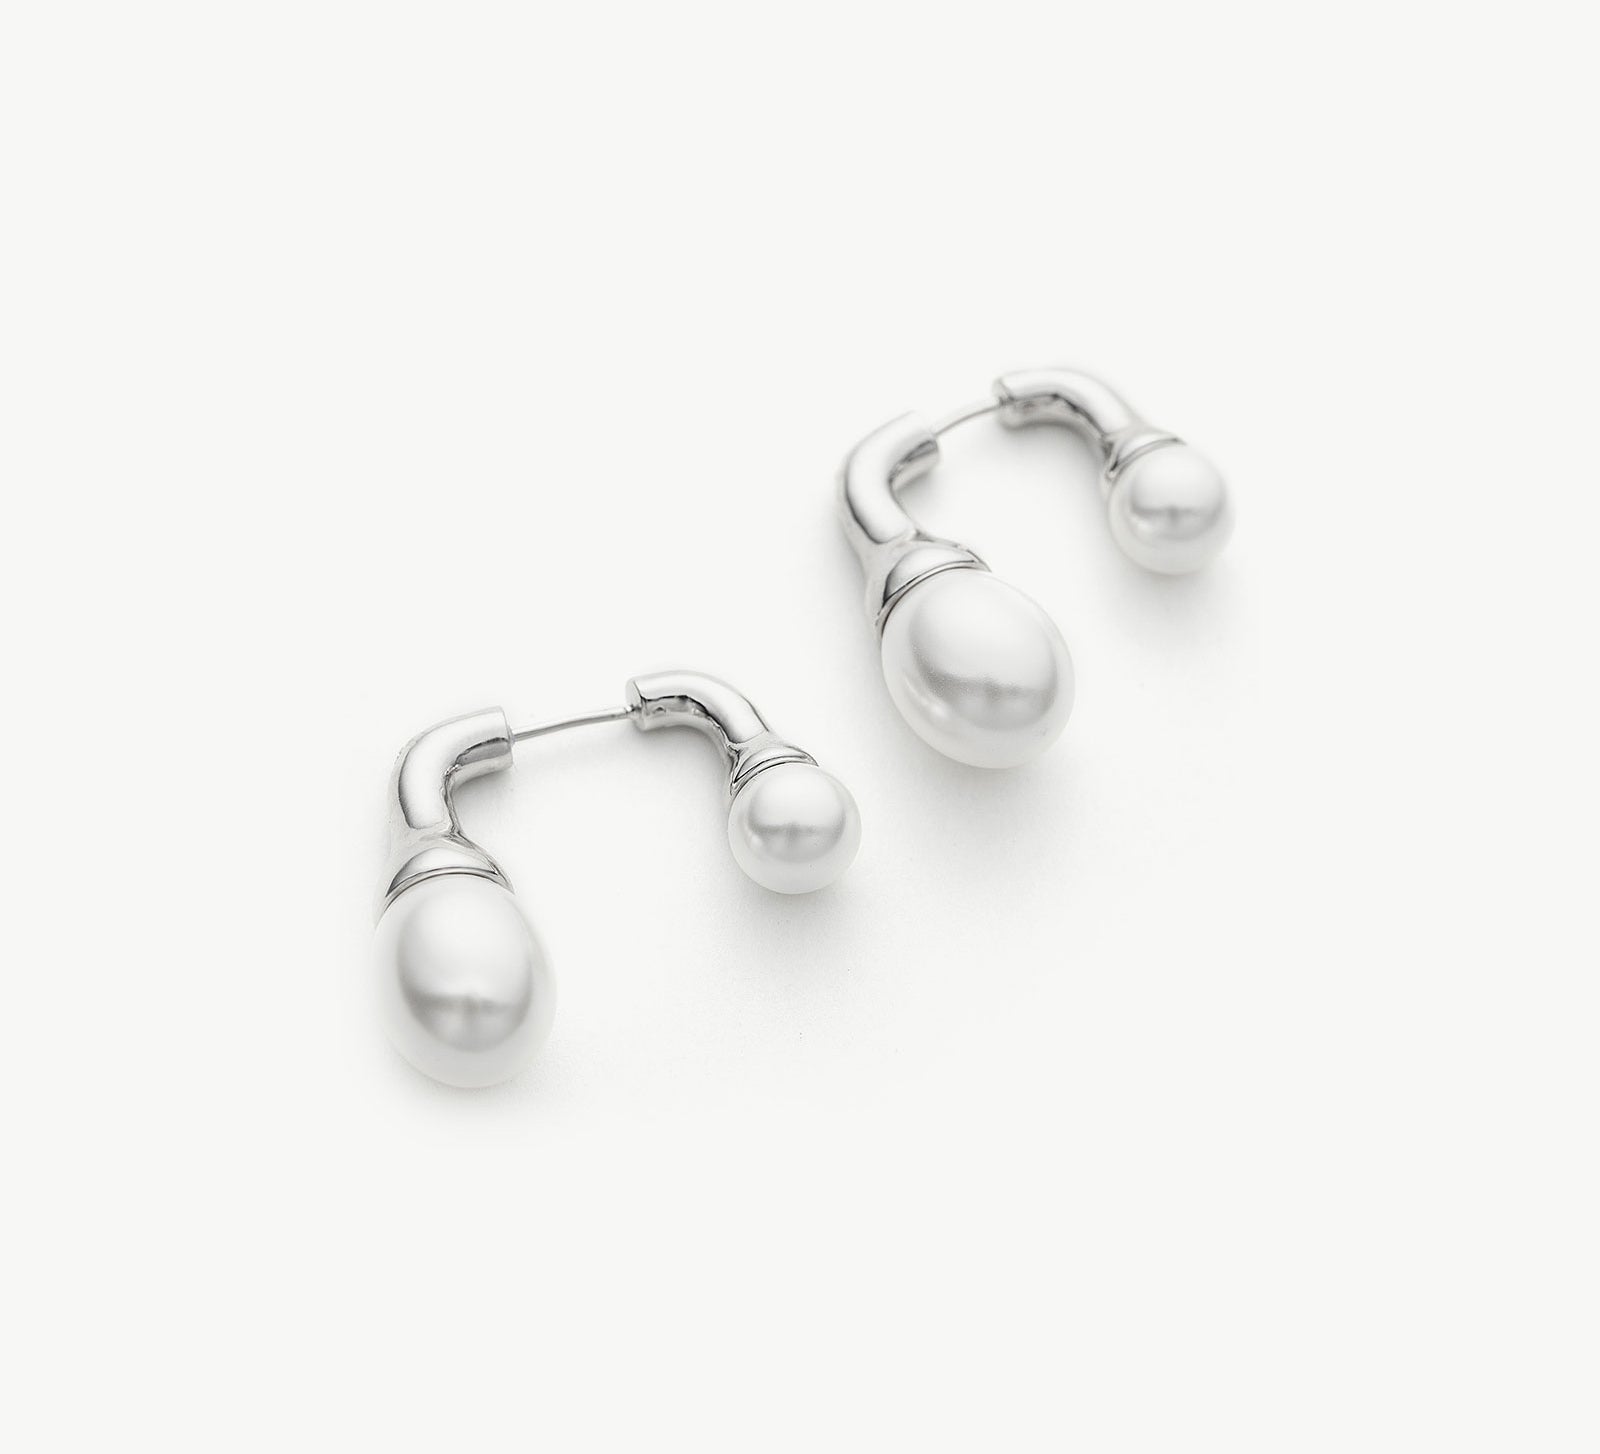 Silver Double Pearls Earrings, an effortlessly charming accessory that seamlessly complements your everyday or special occasion attire